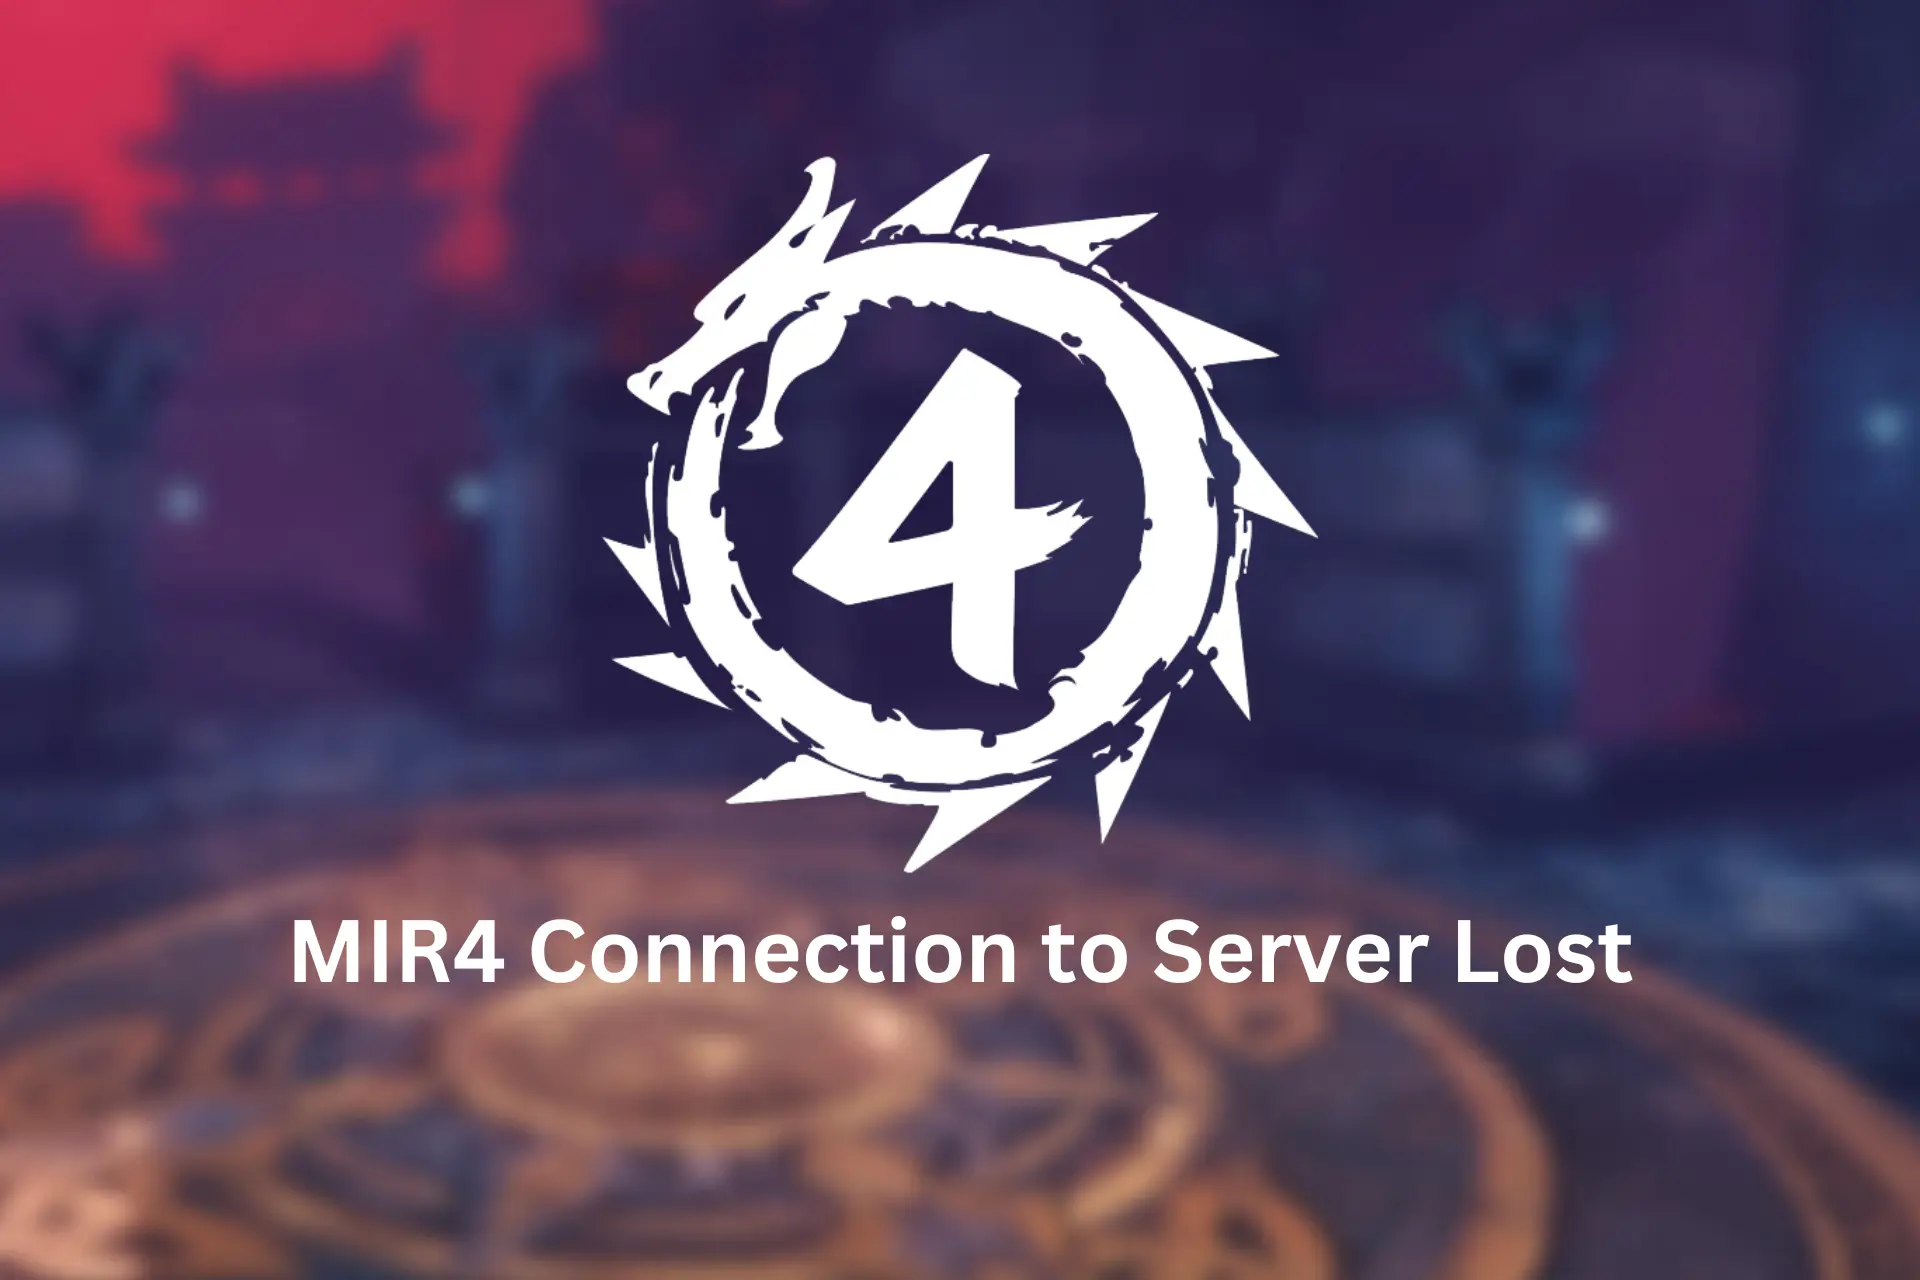 MIR4 Connection to Server Lost